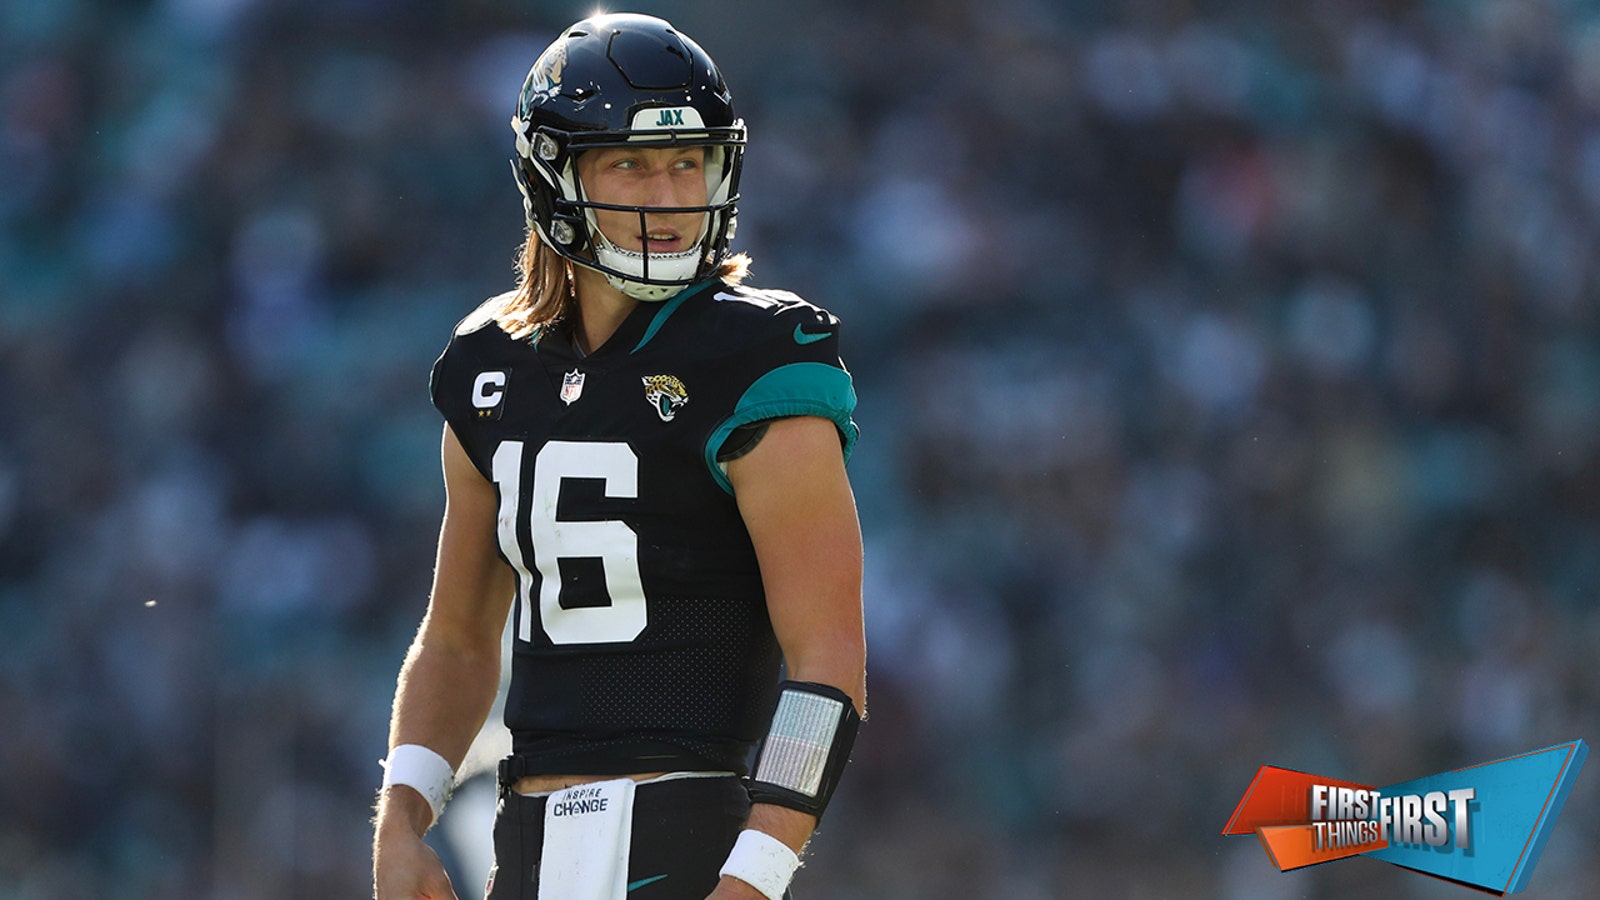 Trevor Lawrence makes his playoff debut against the Chargers